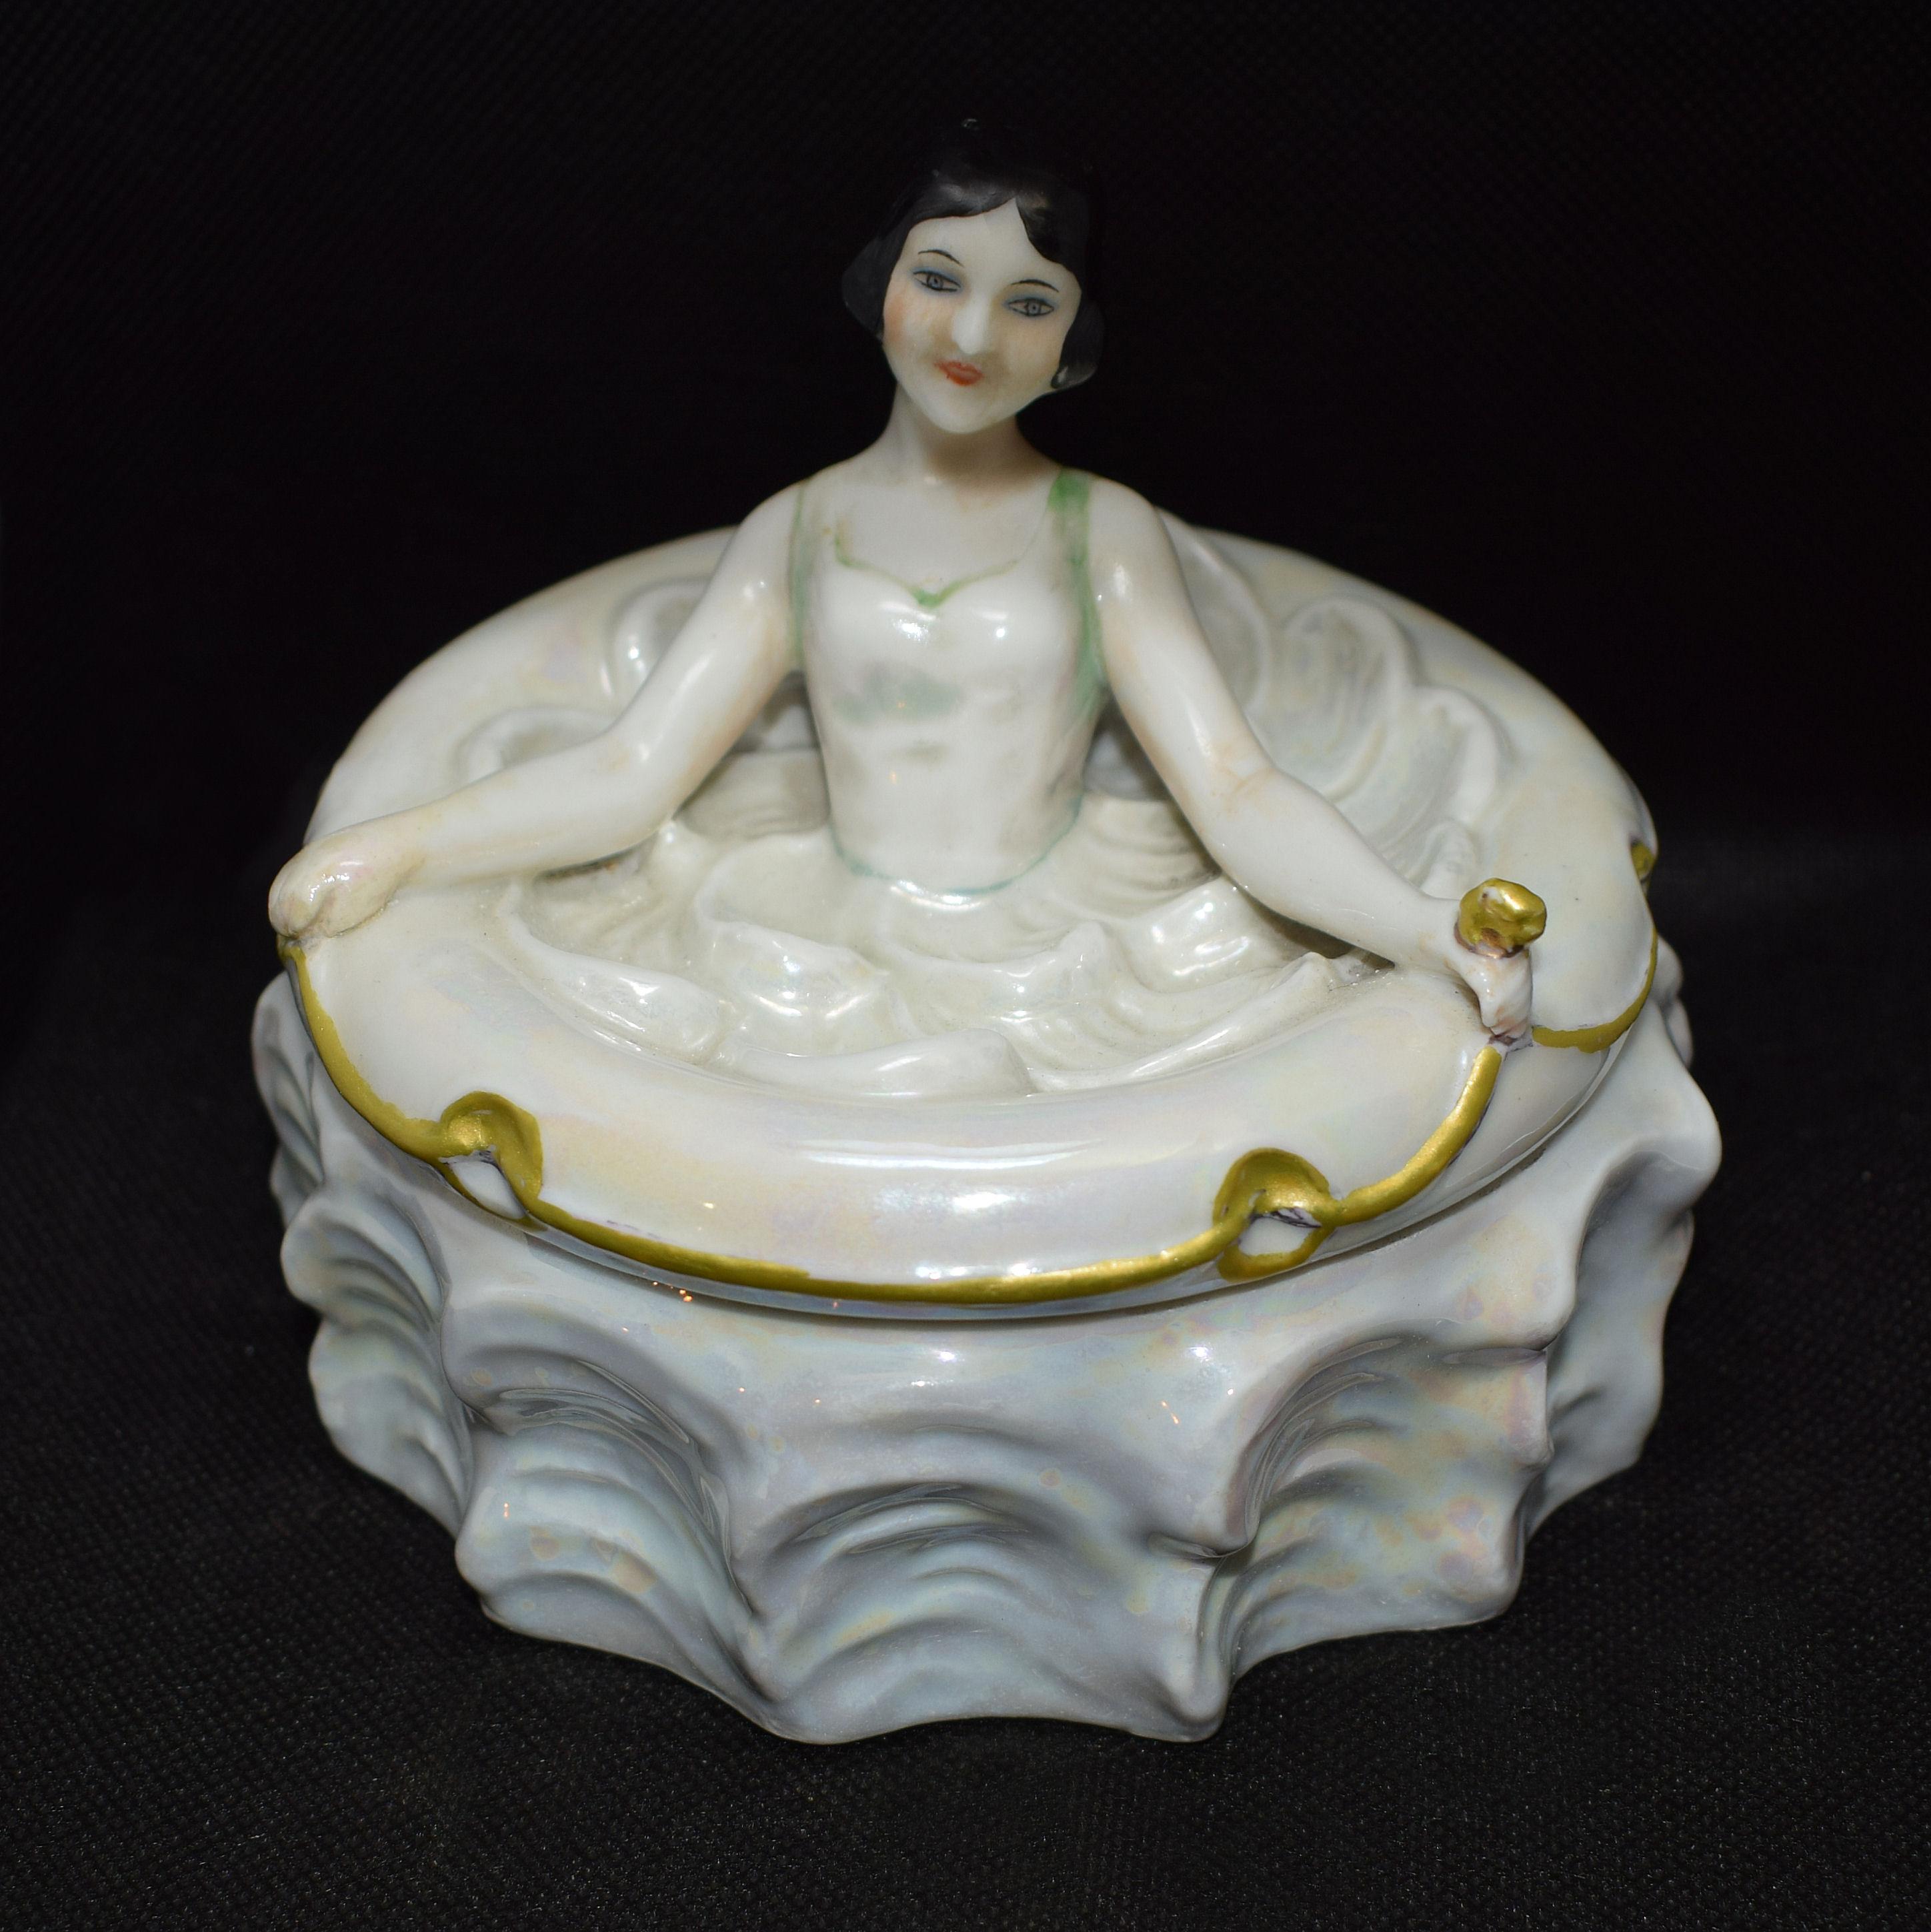 For your consideration is this very attractive and totally original 1930s Art Deco ladies powder/ trinket box. Made from porcelain with a white pearled finish and gold tone gilding to the edges. The top half of the container is in the form of a